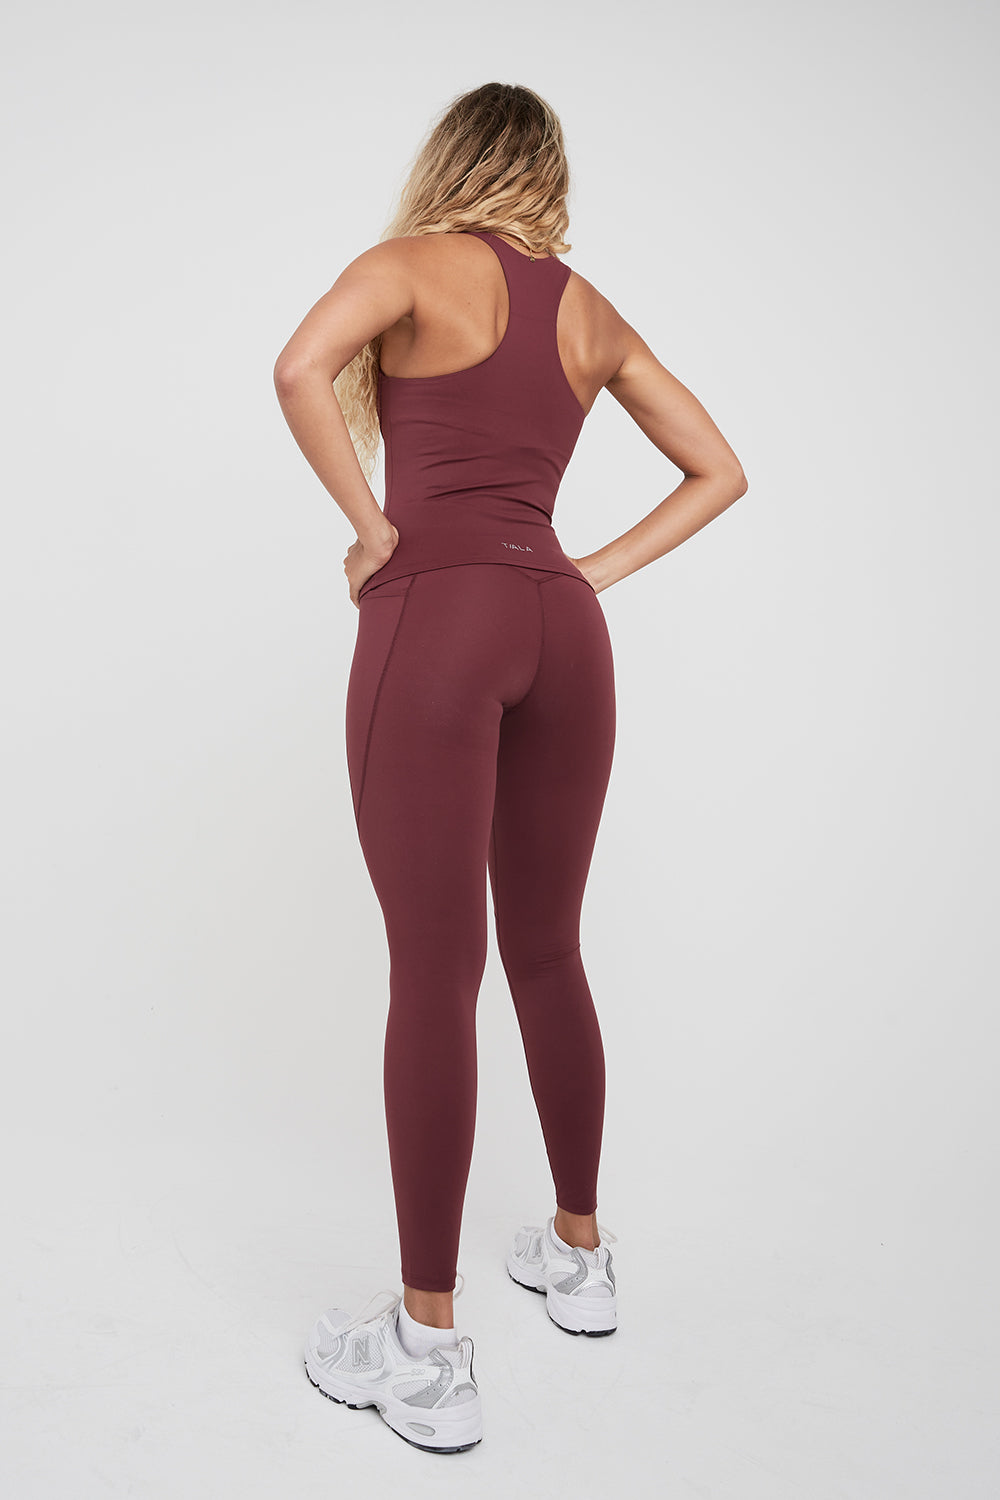 TALA SkinLuxe High Waisted Leggings, Simply Be